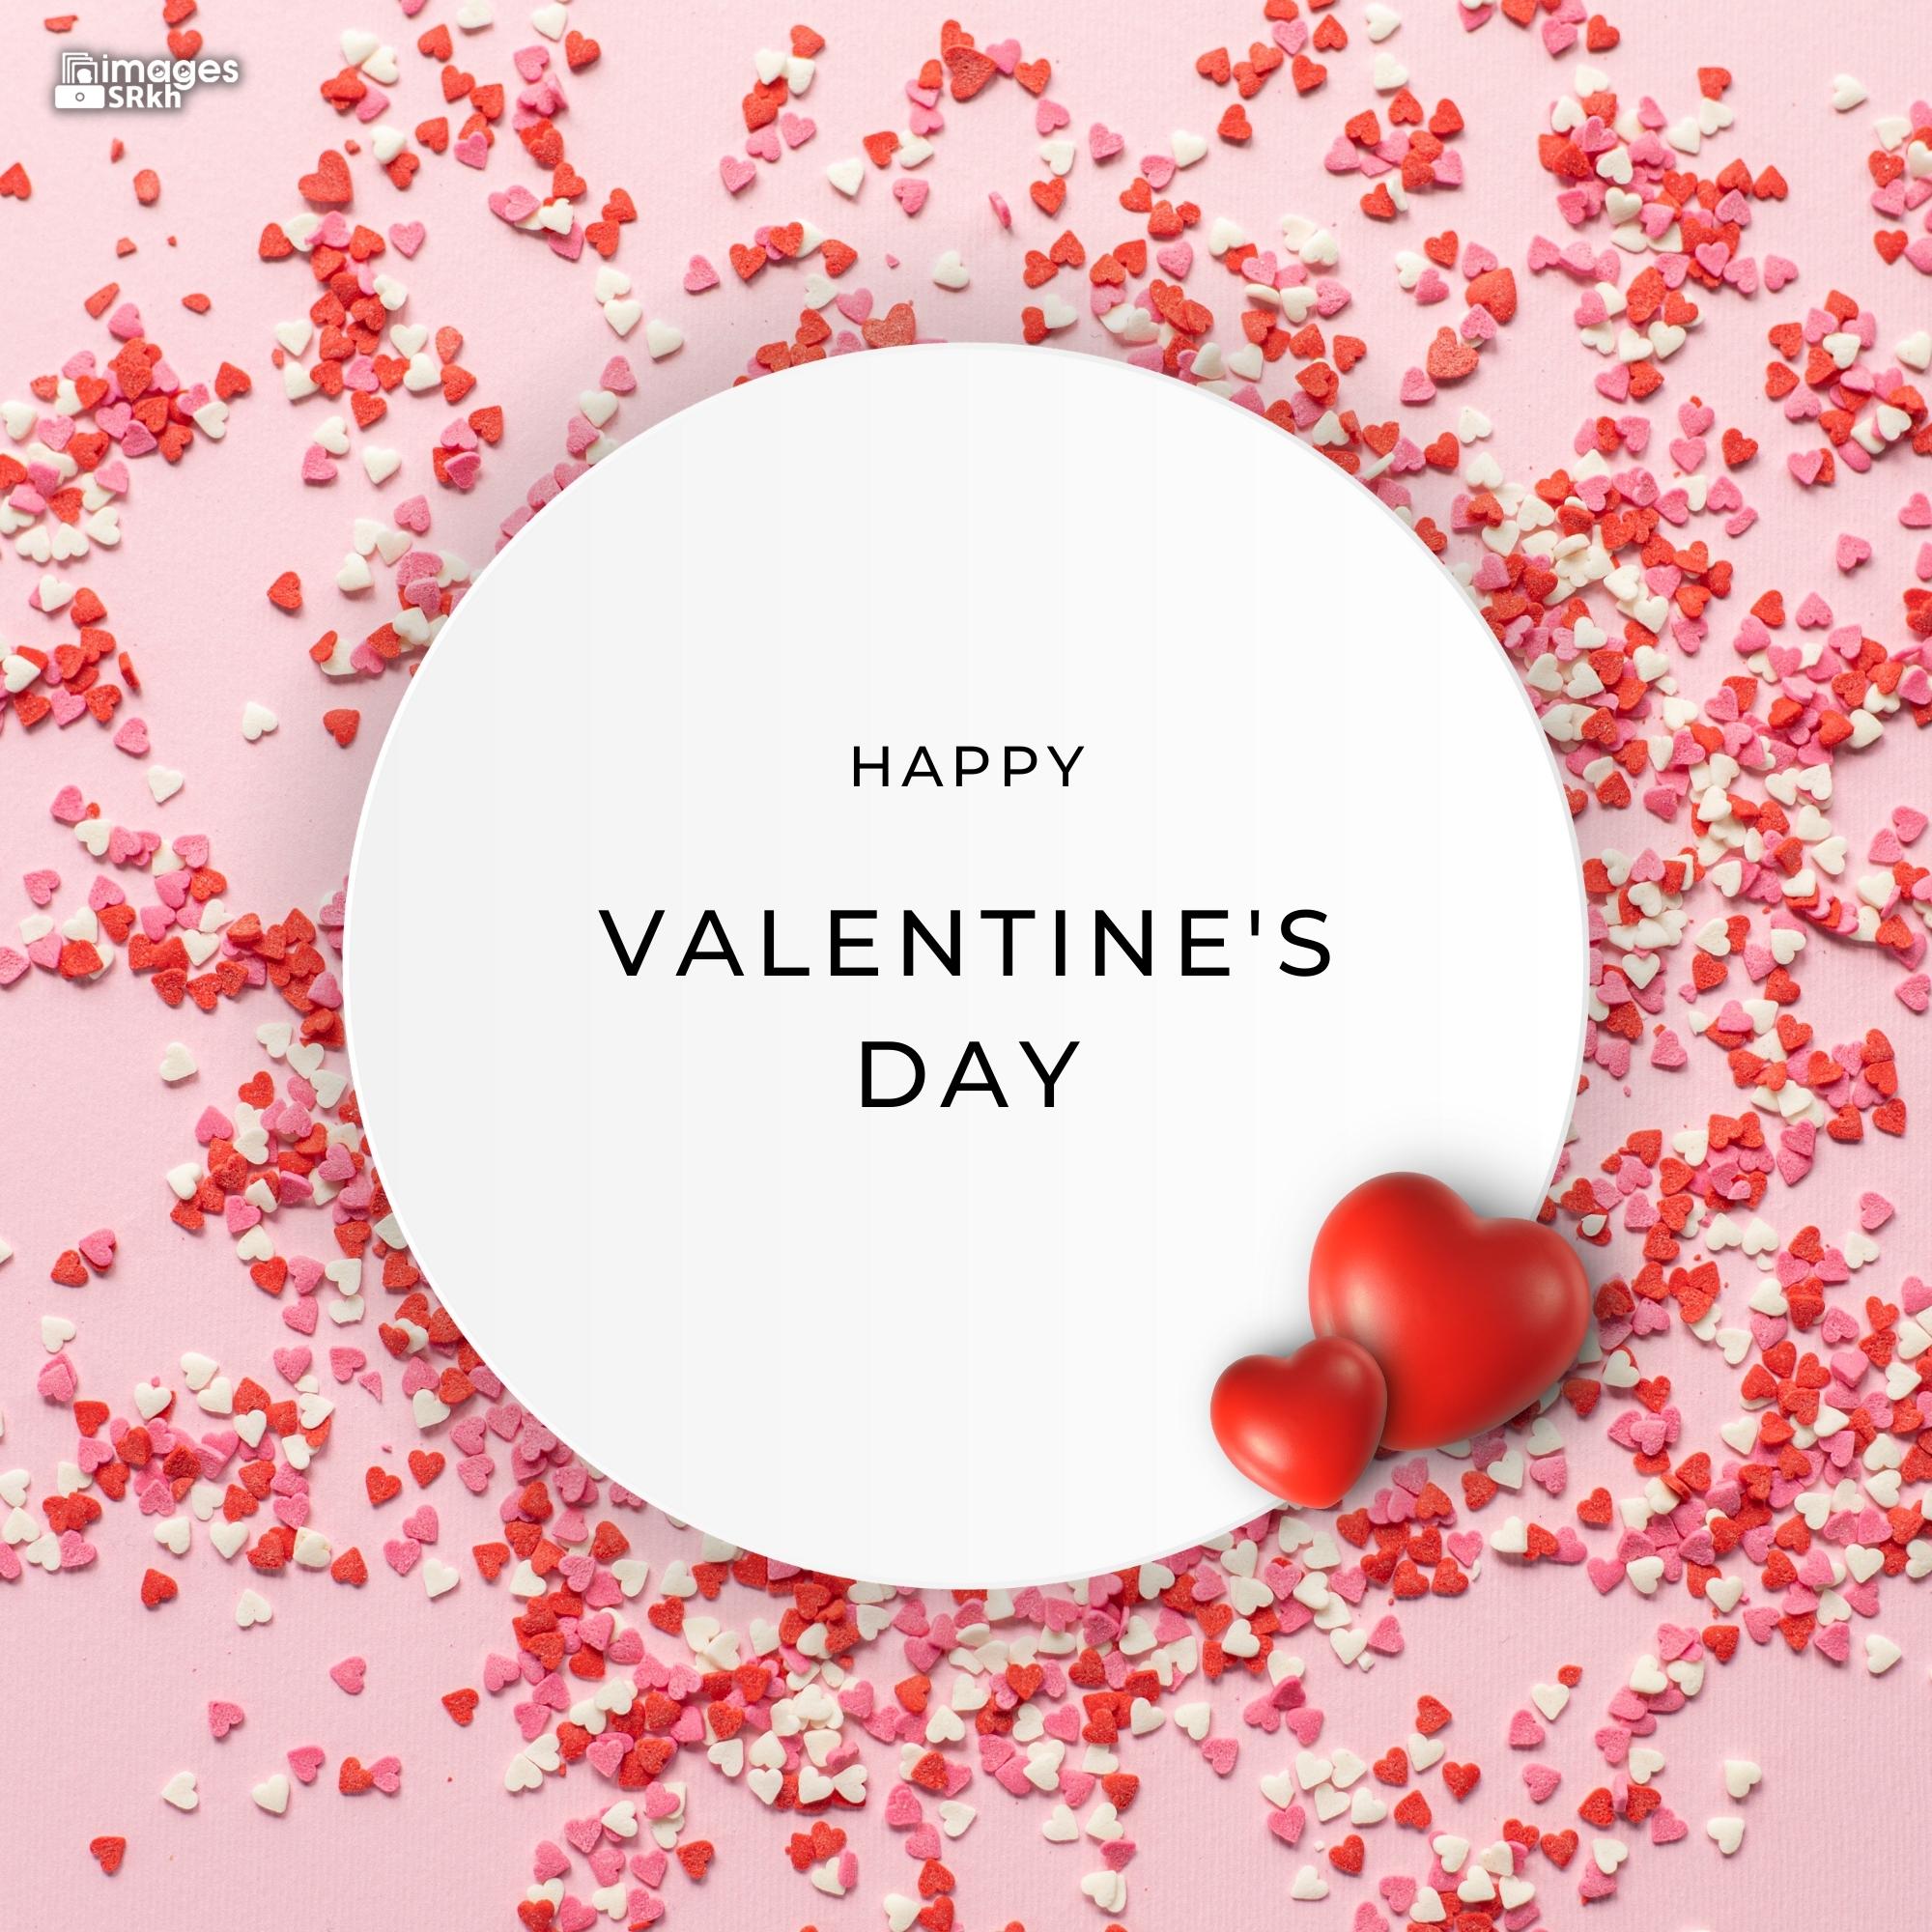 Happy Valentines Day | 455 | PREMIUM IMAGES | Wishes for Love